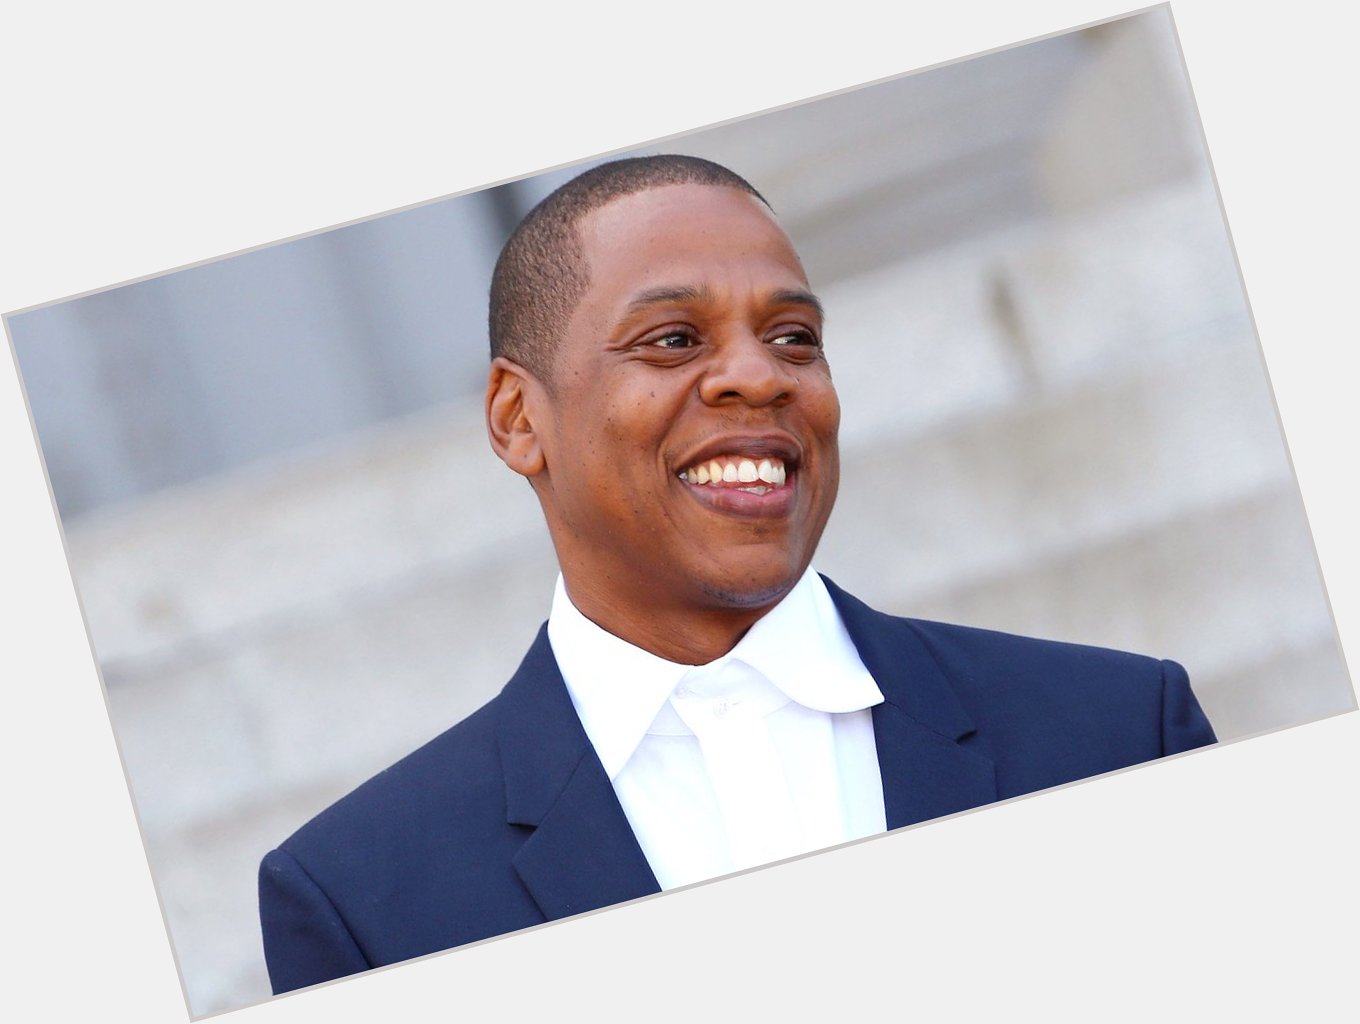 HAPPY BIRTHDAY...  SHAWN \"JAY Z\" CARTER! \"EMPIRE STATE OF MIND\".   